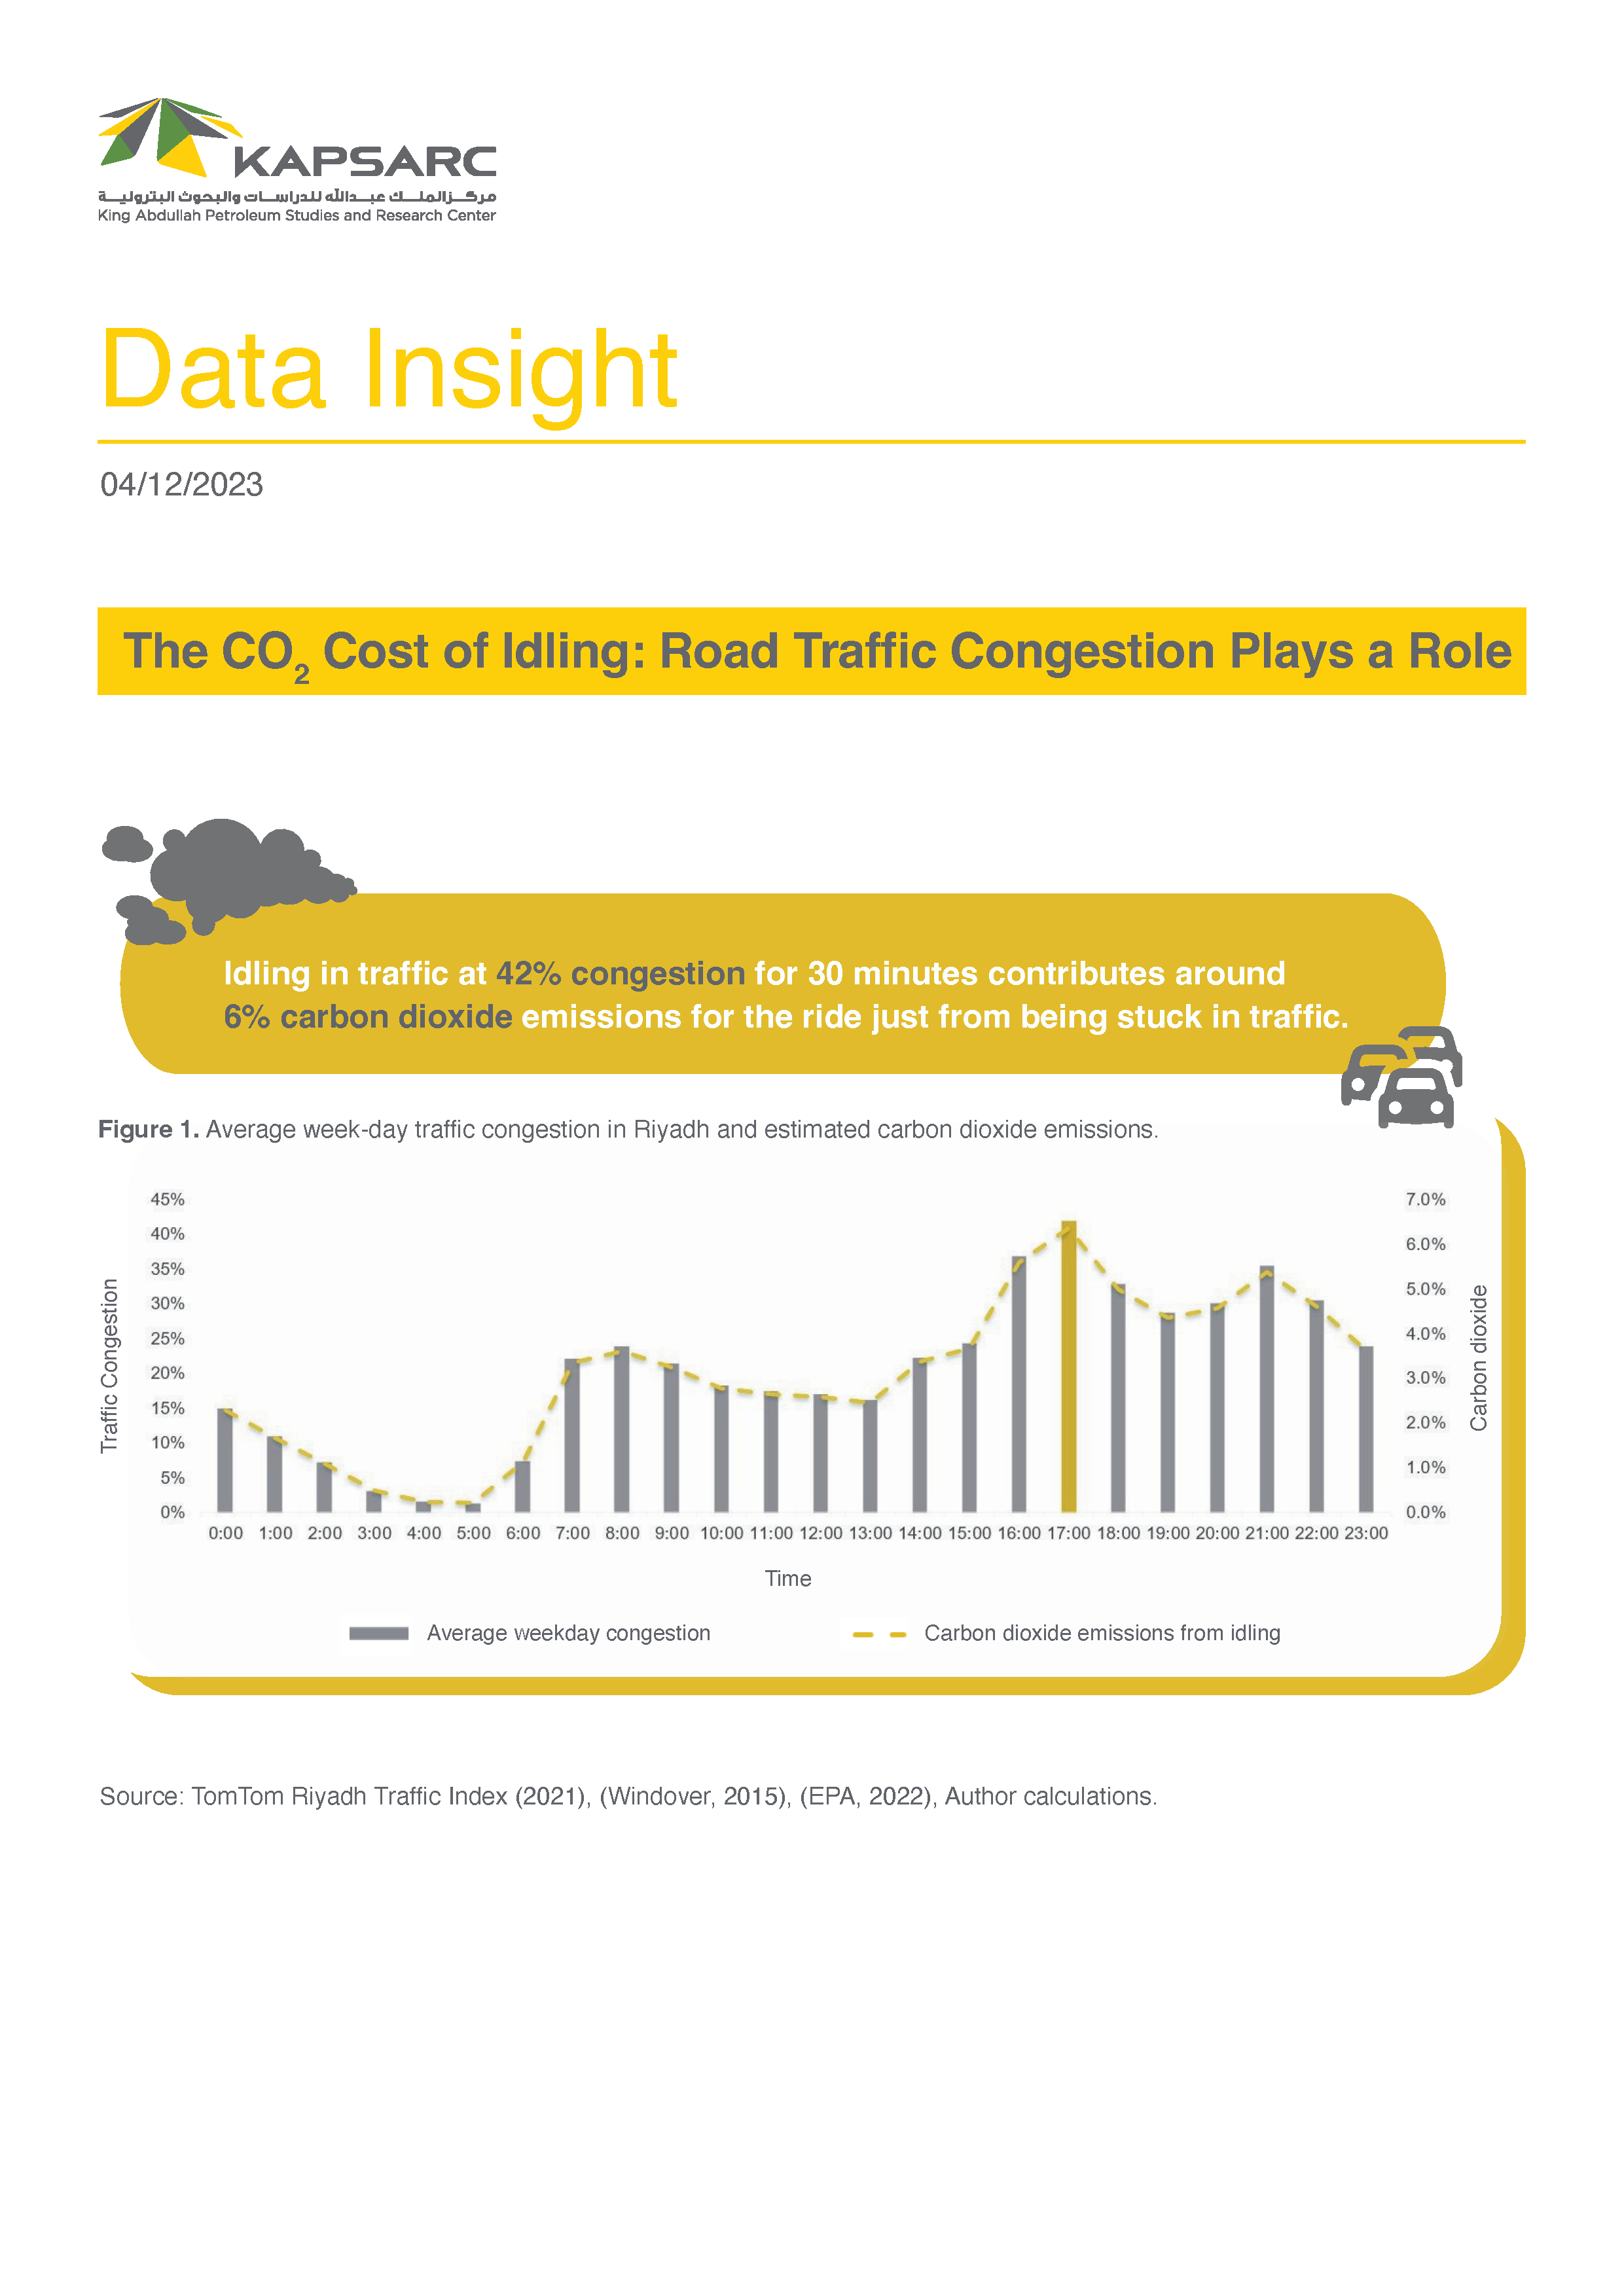 The CO2 Cost of Idling: Road Traffic Congestion Plays a Role